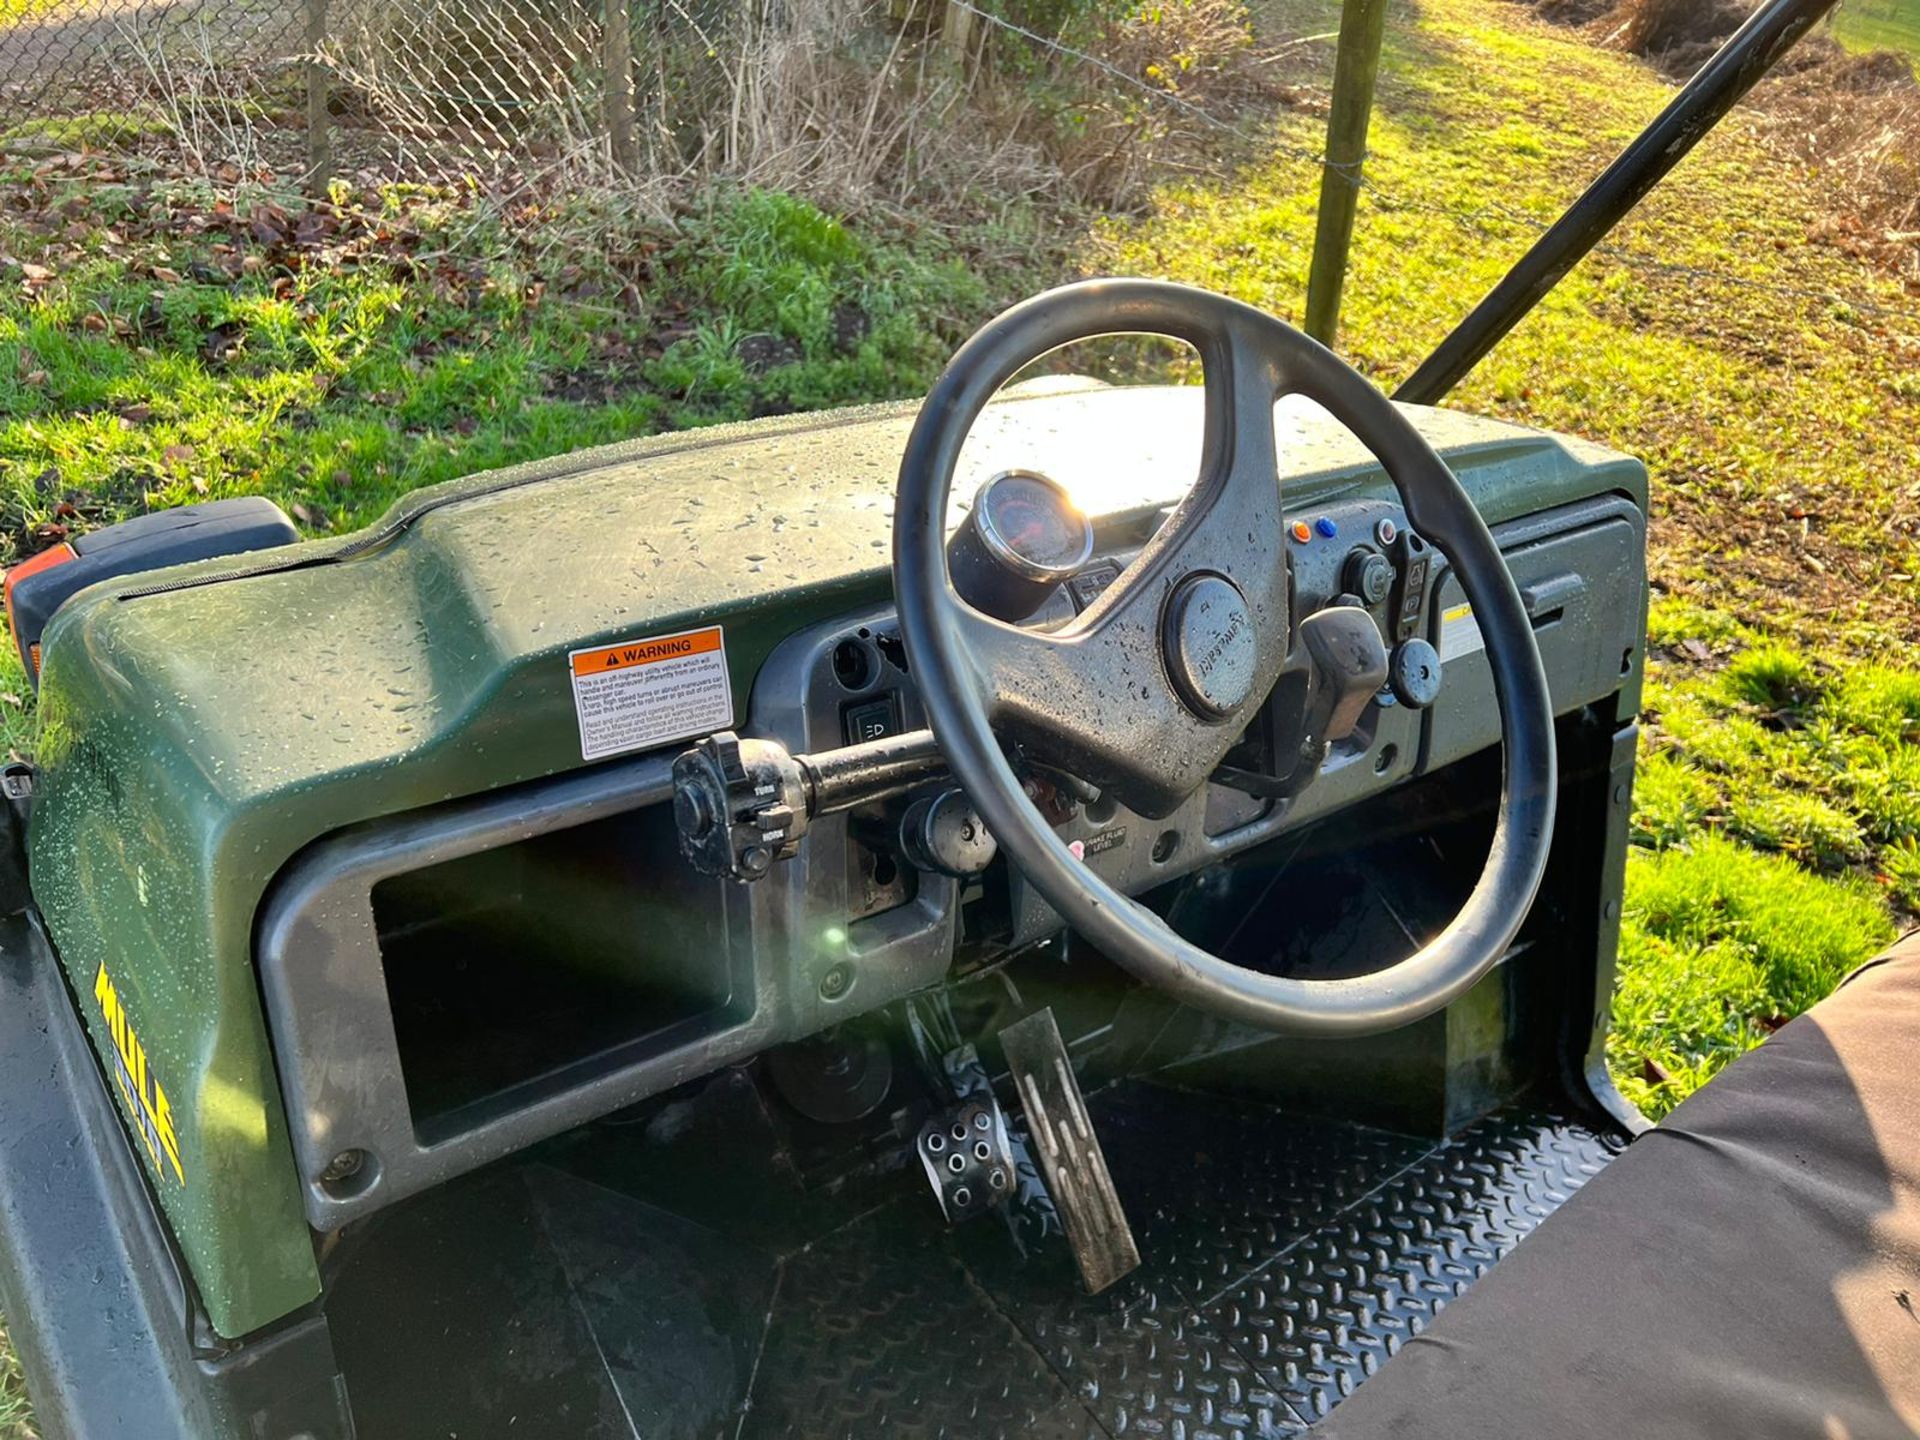 KAWASAKI MULE 3010 4WD BUGGI, RUNS AND DRIVES, SHOWING A LOW 2256 HOURS, ROAD REGISTERED *PLUS VAT* - Image 10 of 13